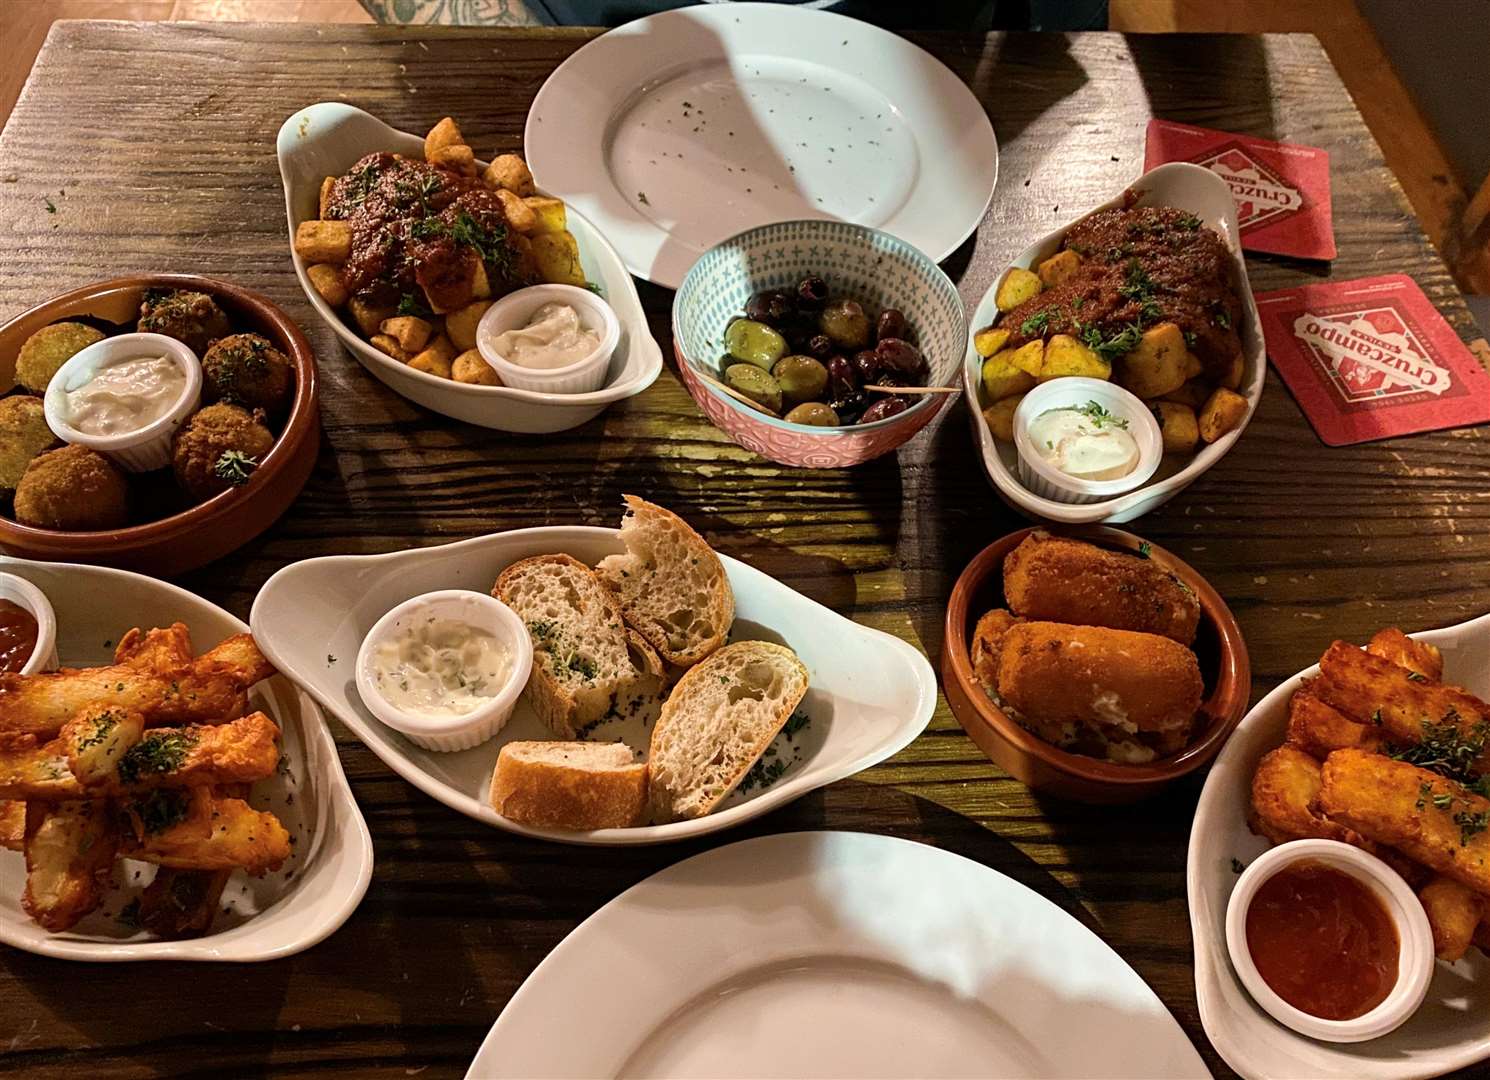 We tried the tapas at Poco Loco in Chatham